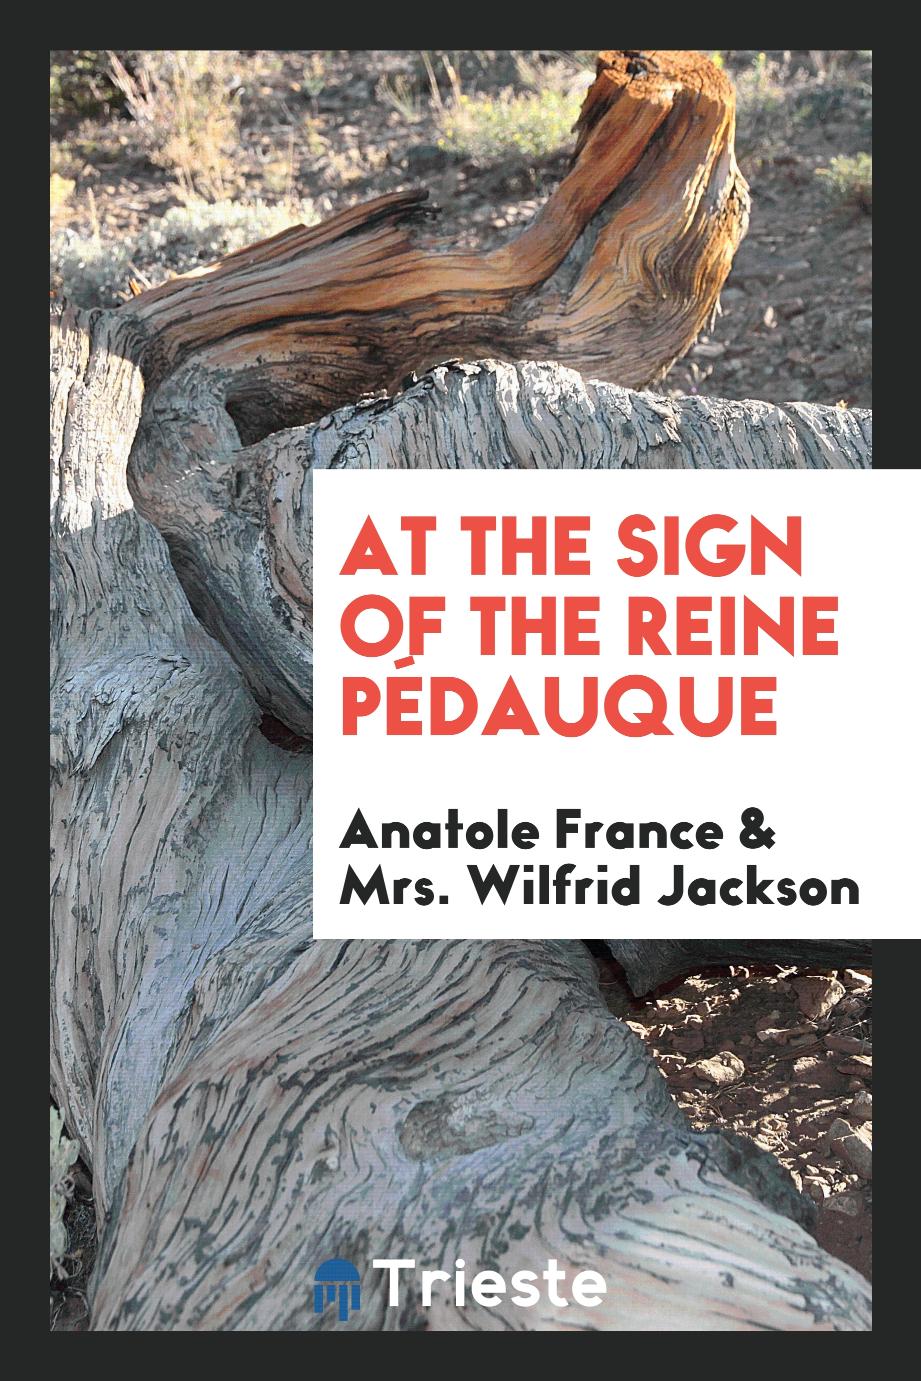 Anatole France, Mrs. Wilfrid Jackson - At the sign of the Reine Pédauque